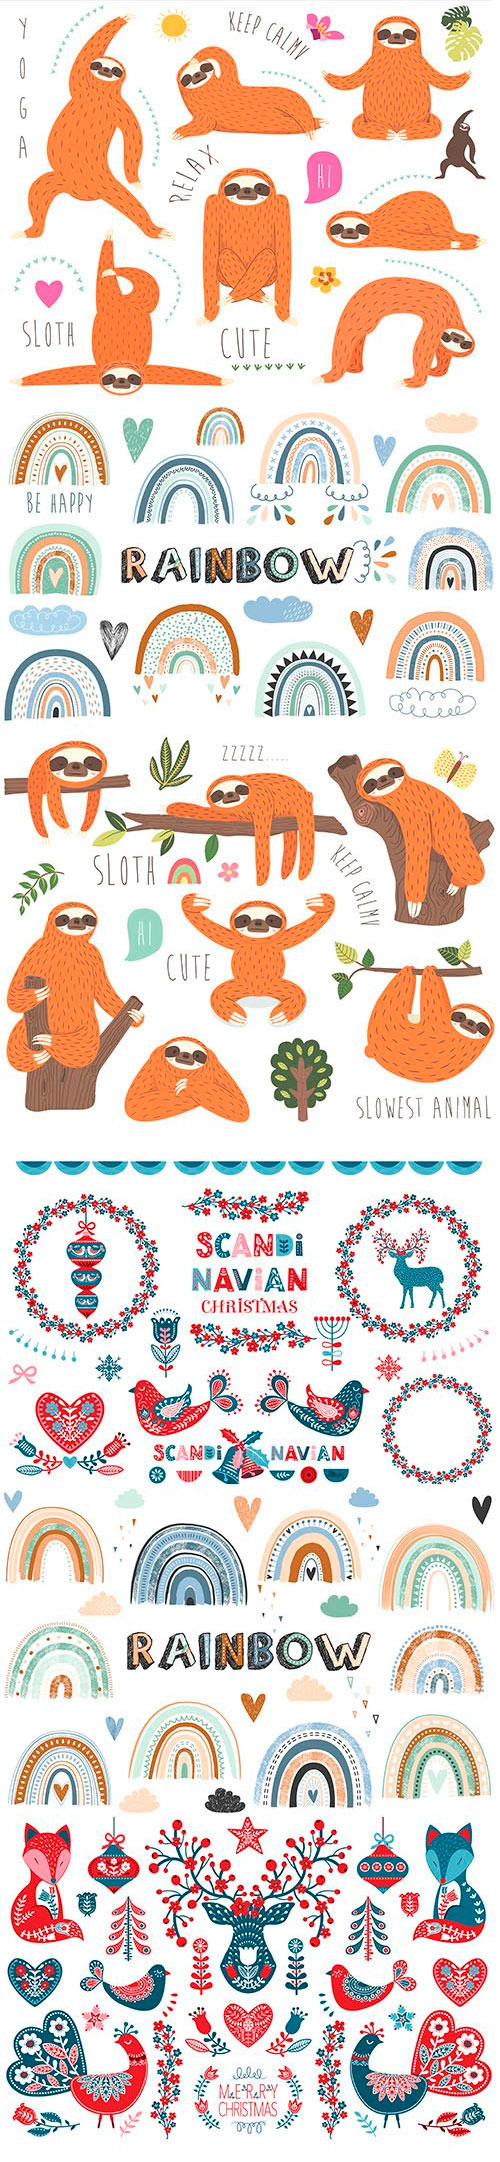 Collection of cute sloth illustration